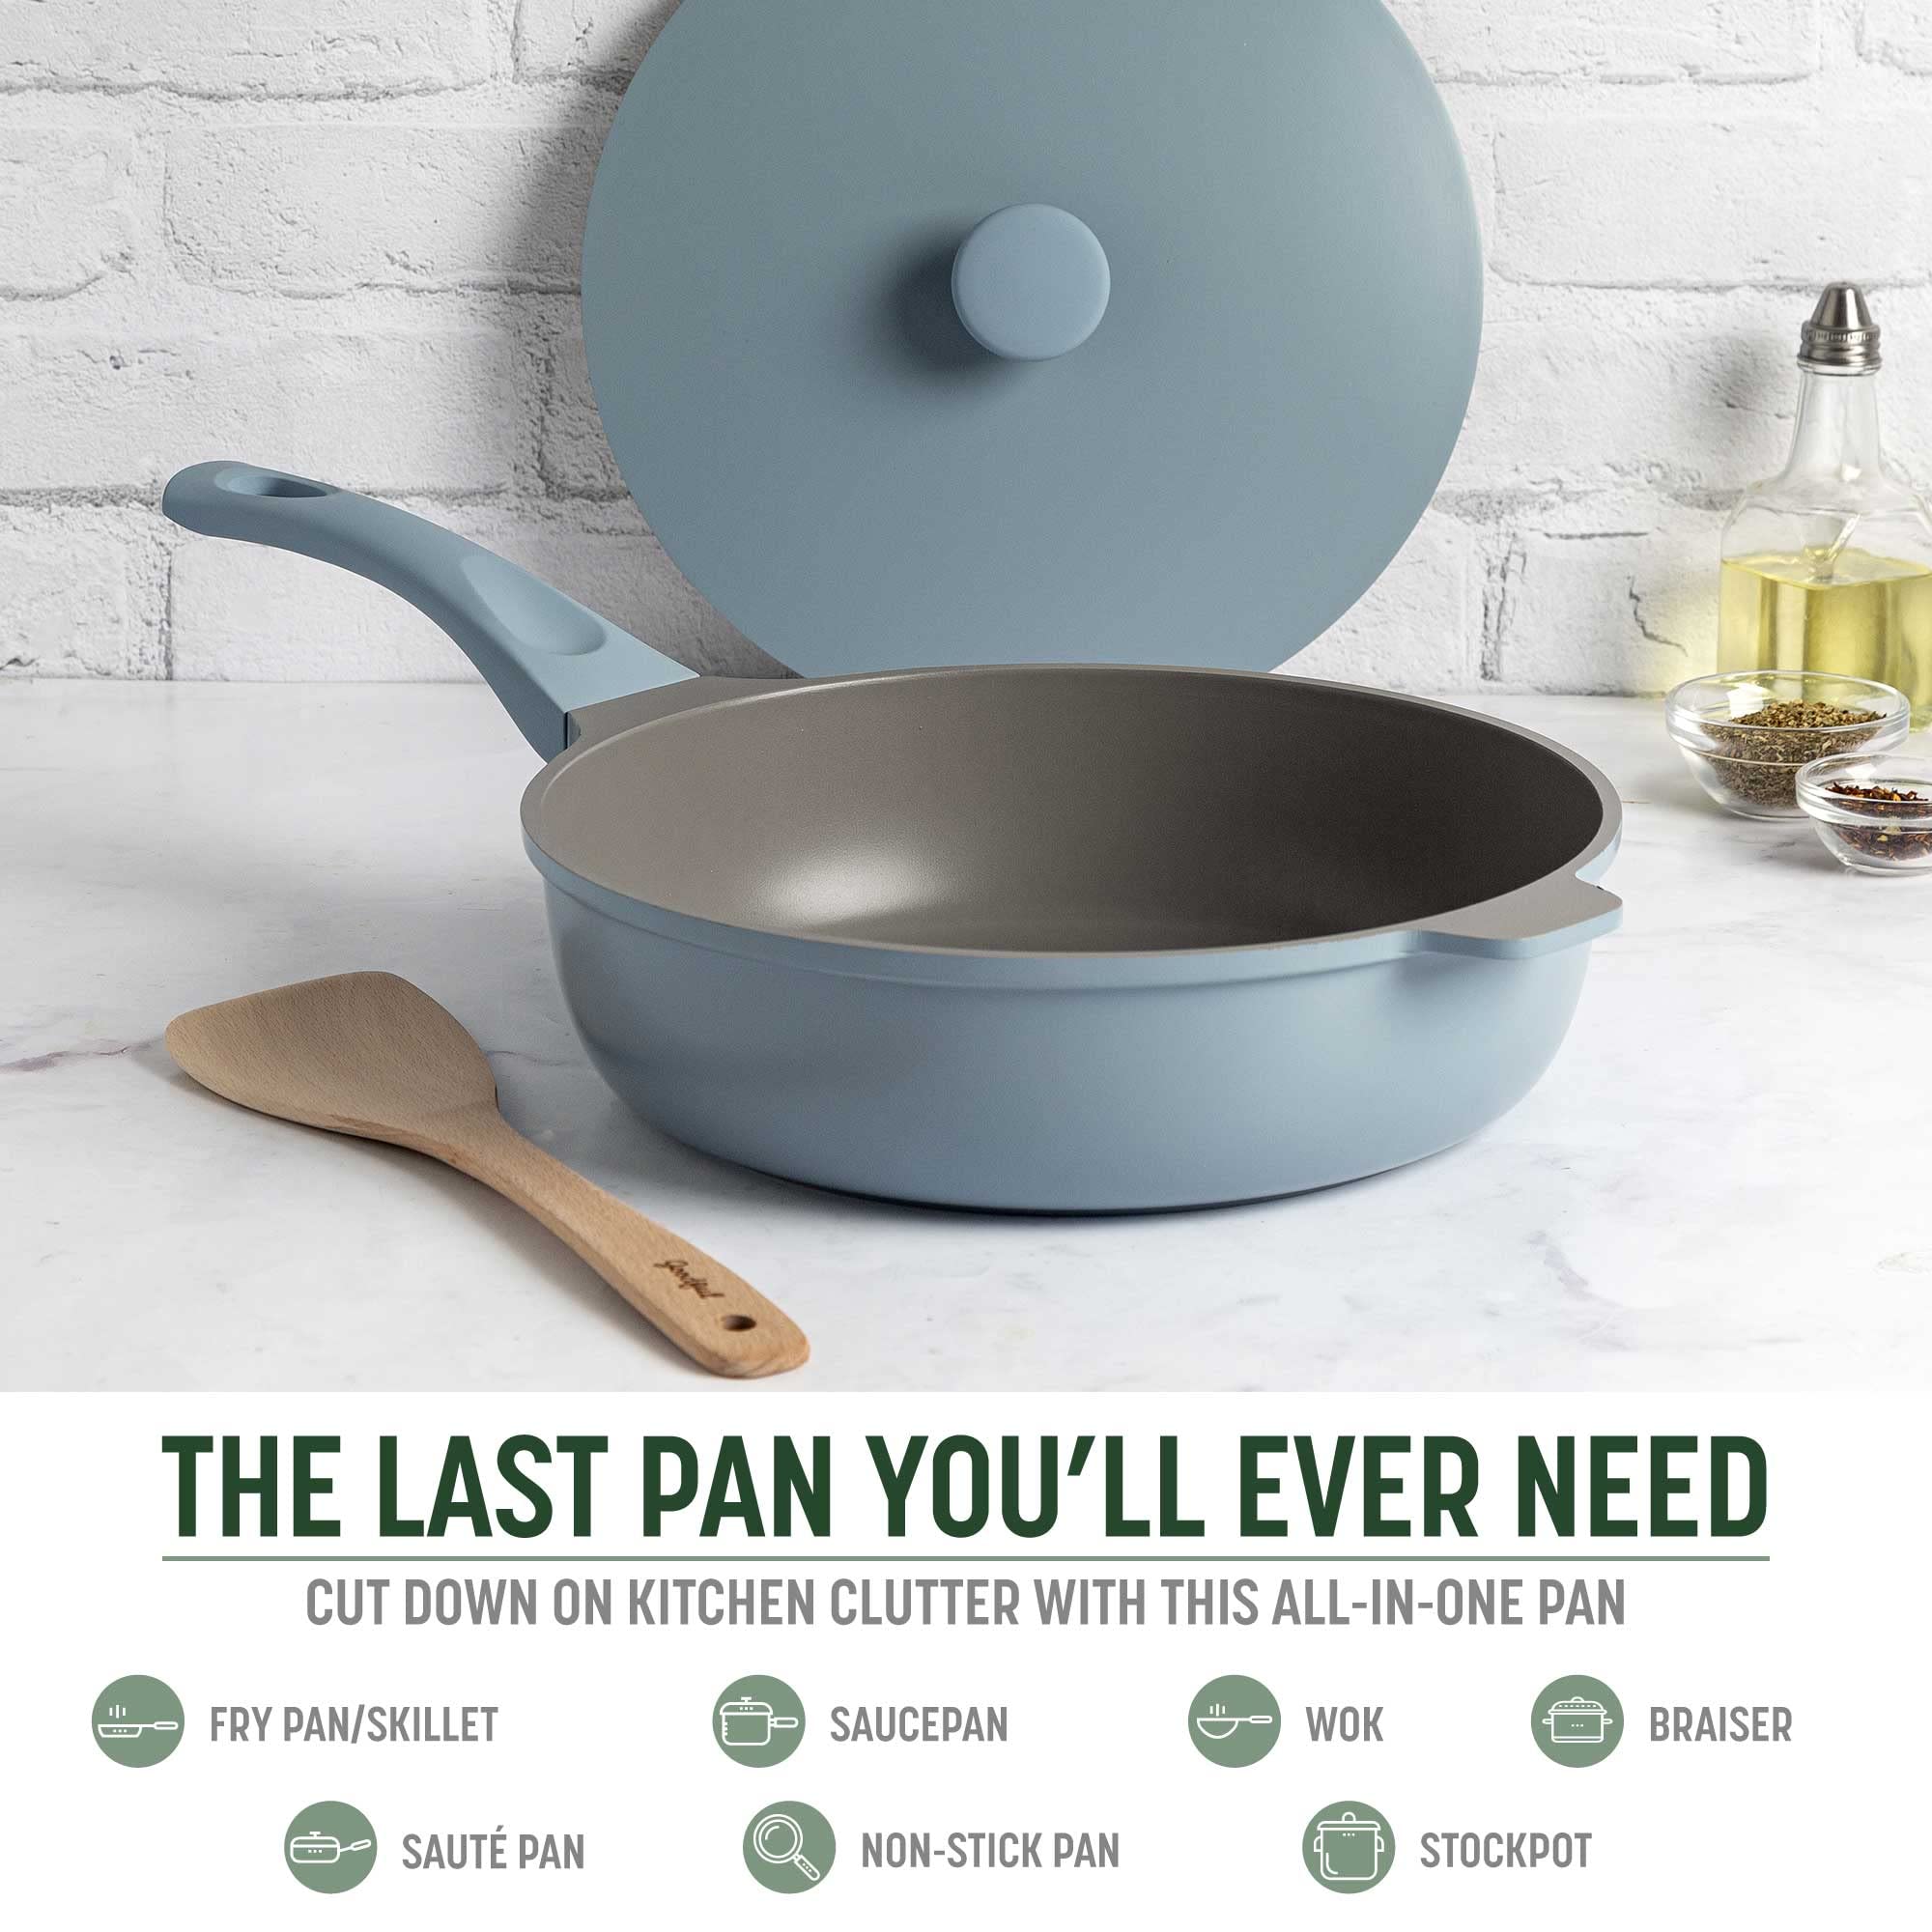 Goodful All-in-One Pan, Multilayer Nonstick, High-Performance Cast Construction, Multipurpose Design Replaces Multiple Pots and Pans, Dishwasher Safe Cookware, 11-Inch, 4.4-Quart Capacity, Blue Mist